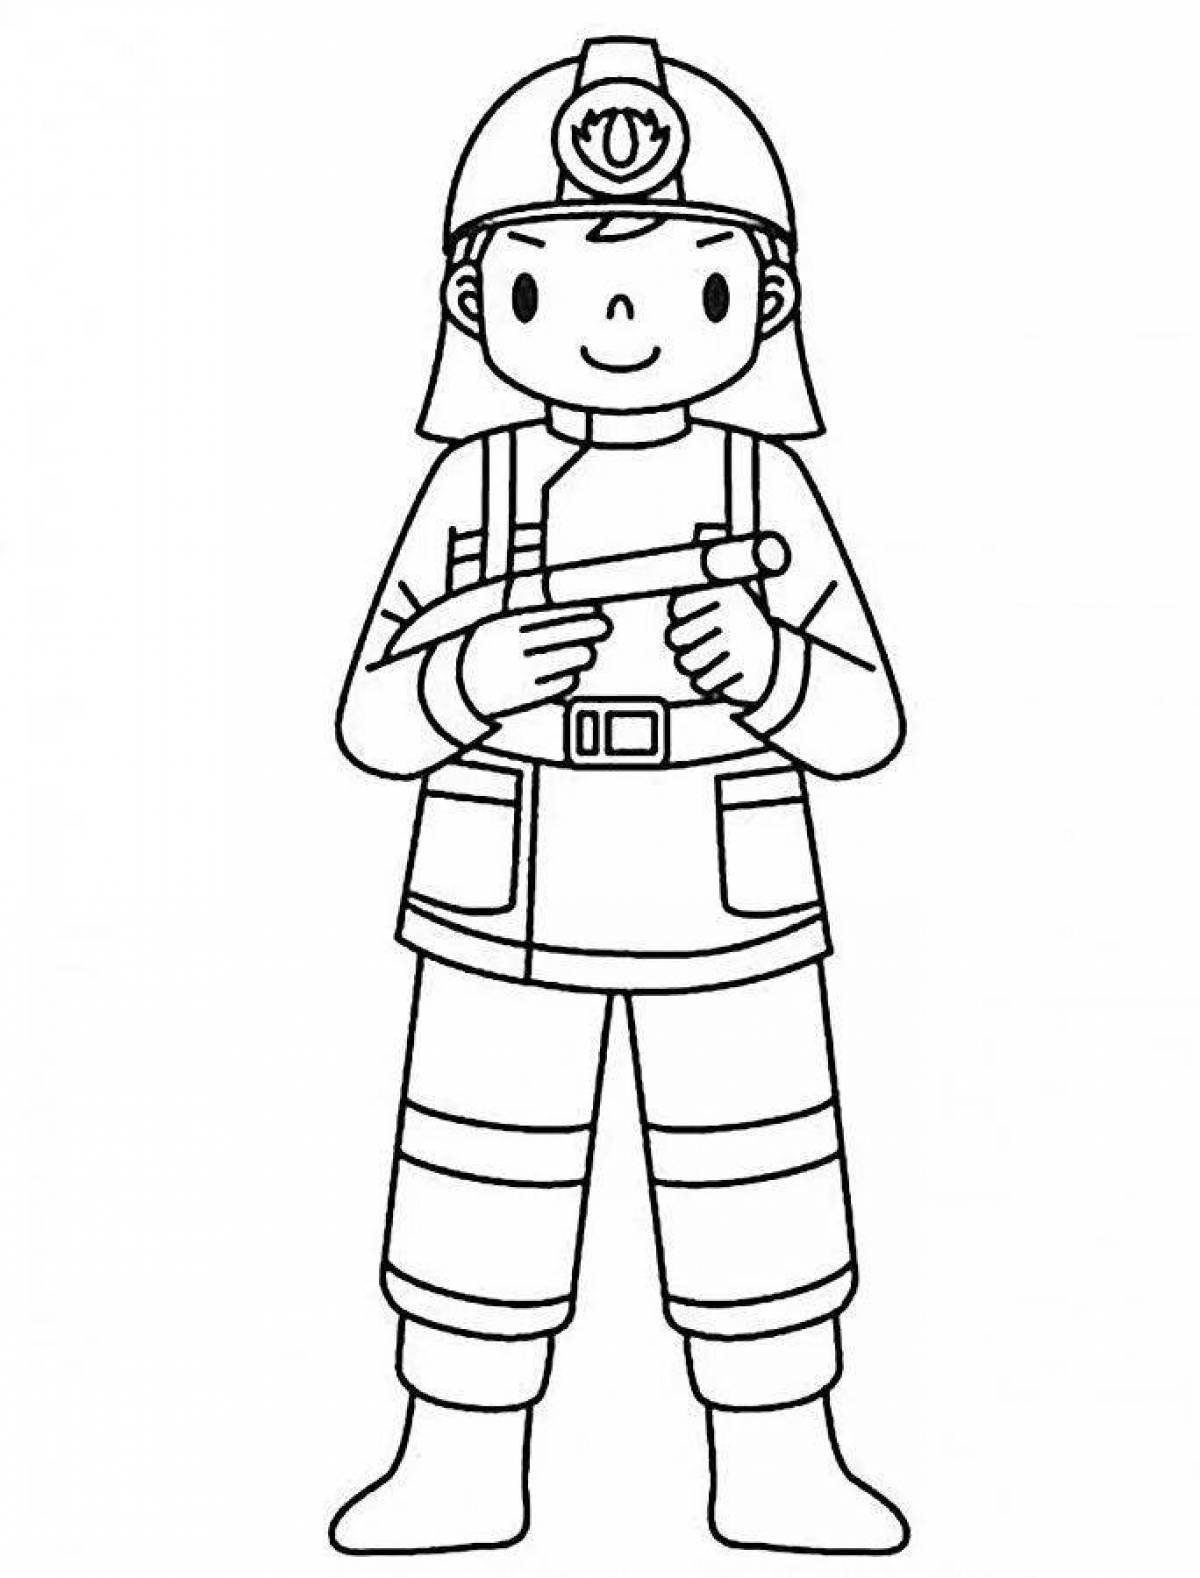 Shiny firefighter coloring page